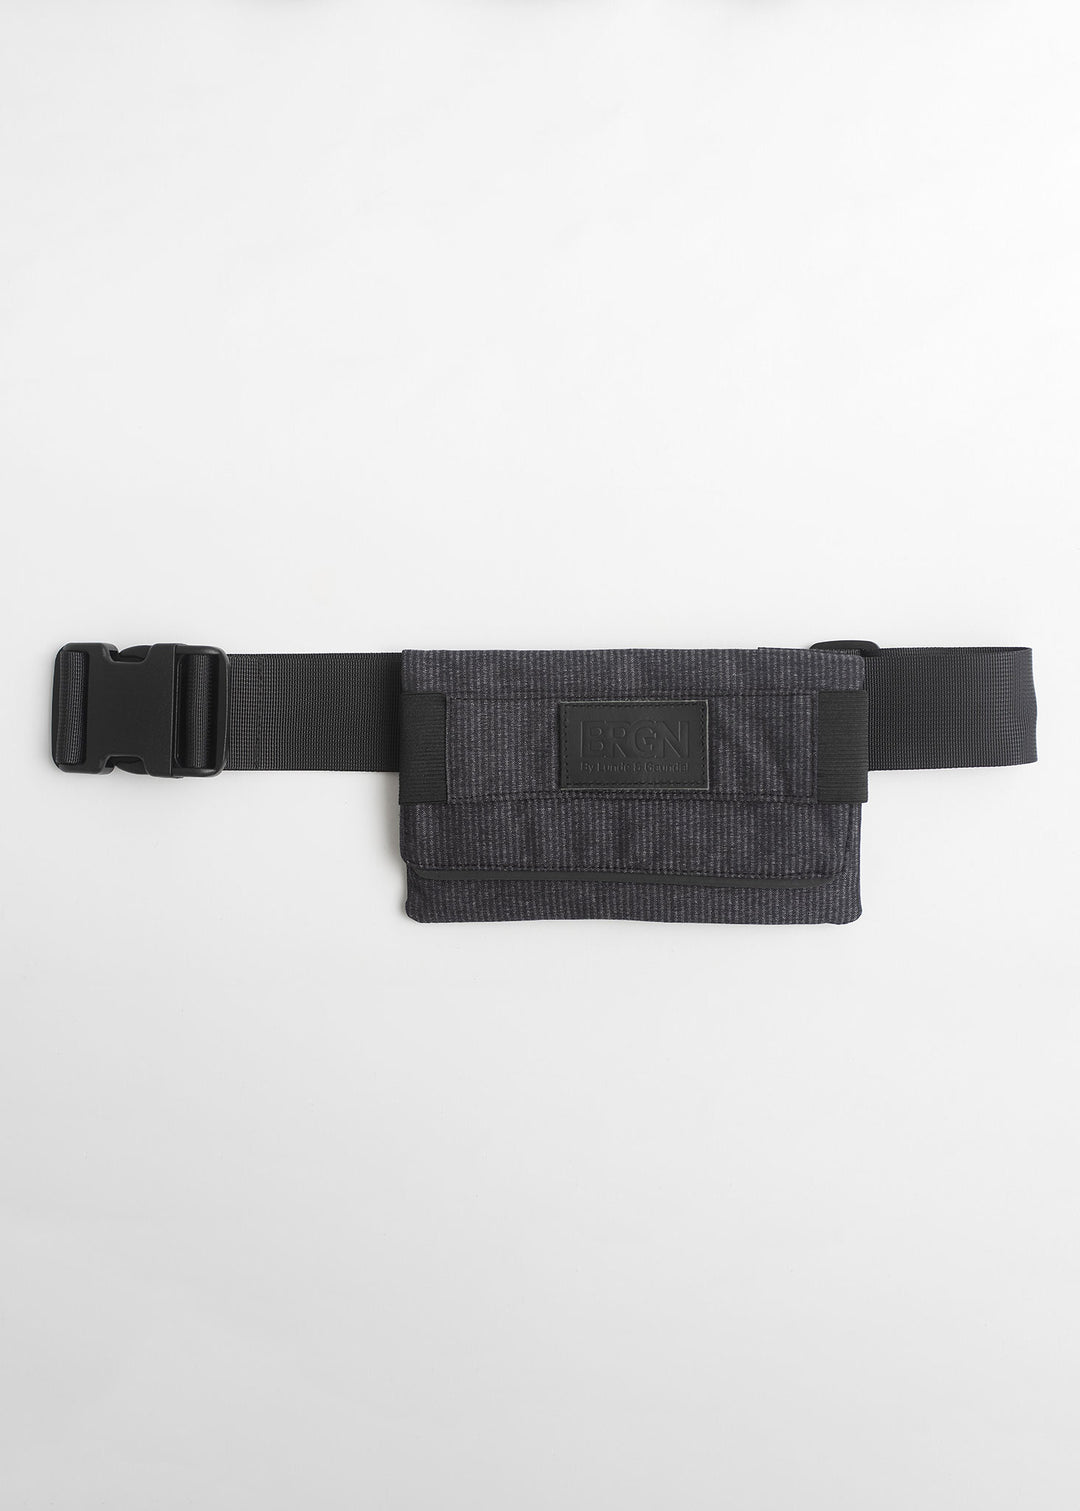 BRGN by Lunde & Gaundal Belt Bag Accessories 090 Charcoal